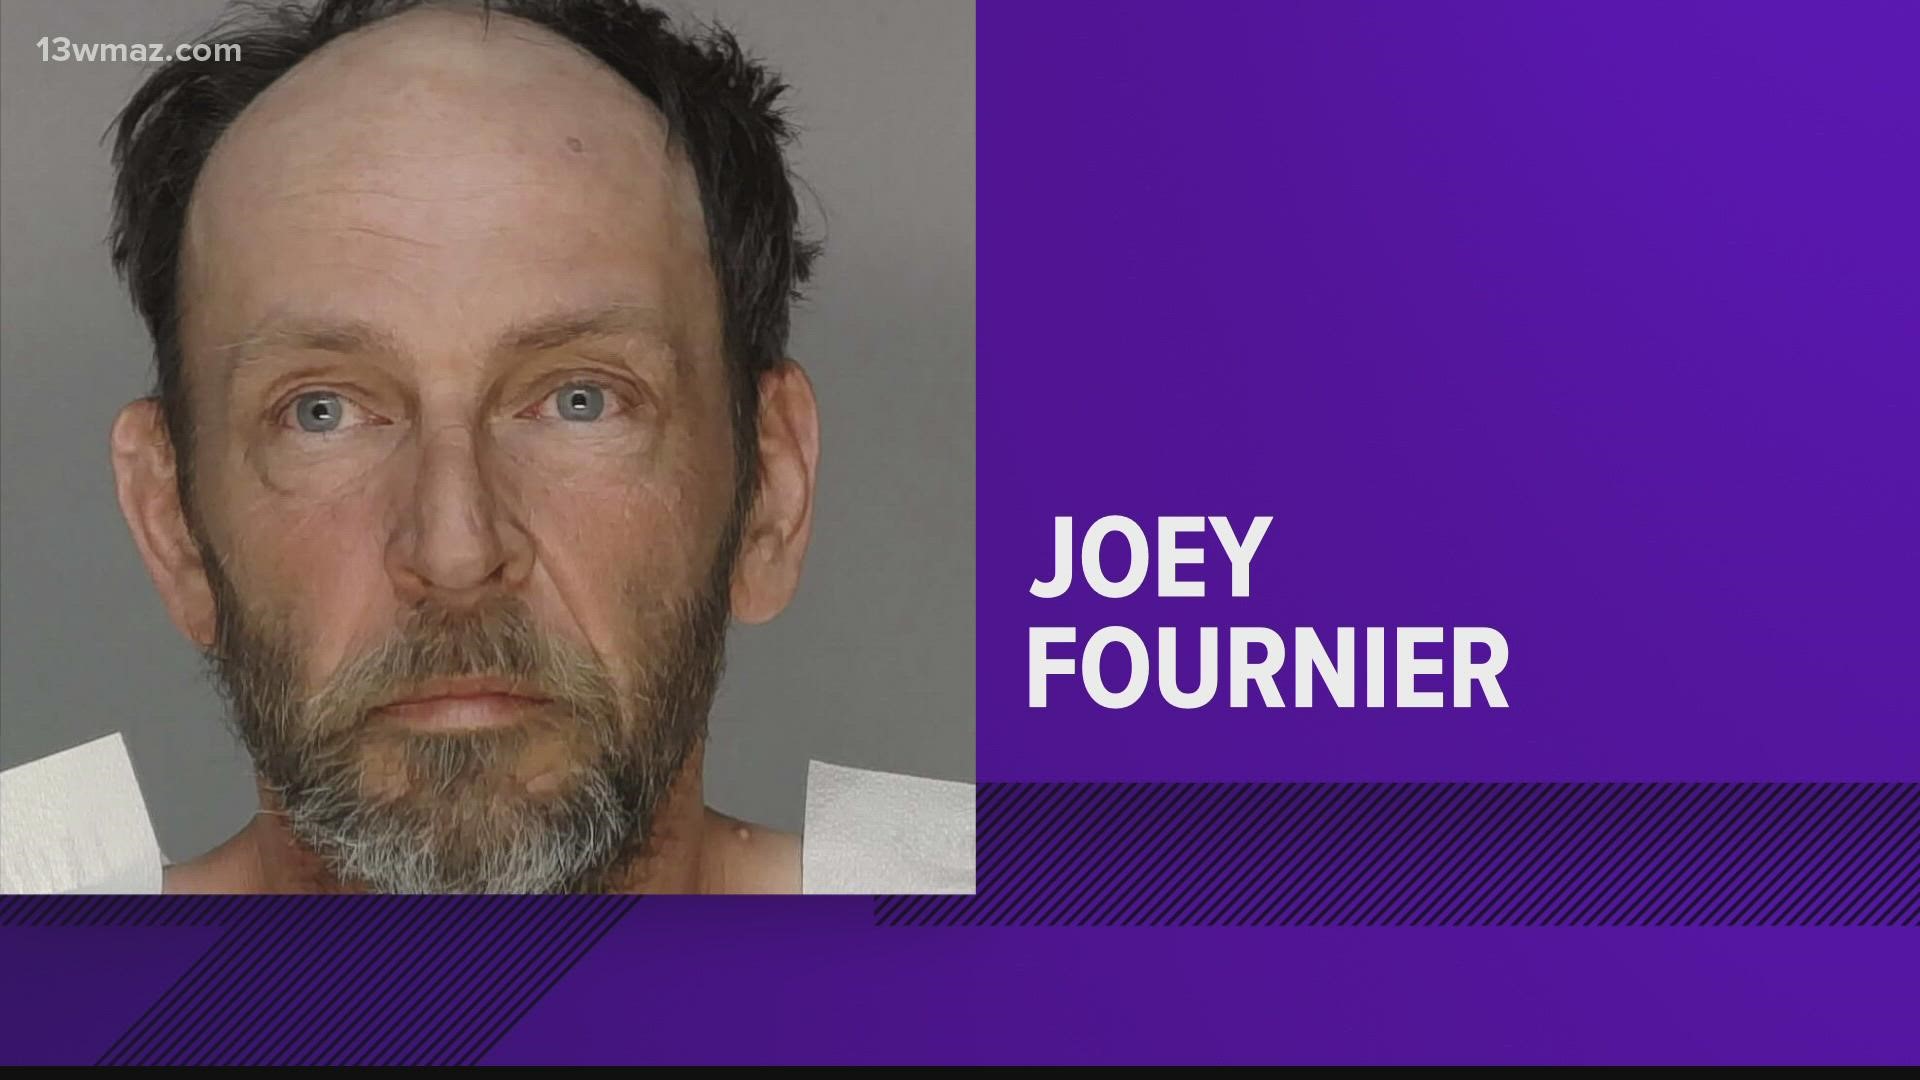 A man charged with murdering his ex-girlfriend was supposed to make his first appearance in court Wednesday, but deputies say he's in the infirmary on suicide watch.